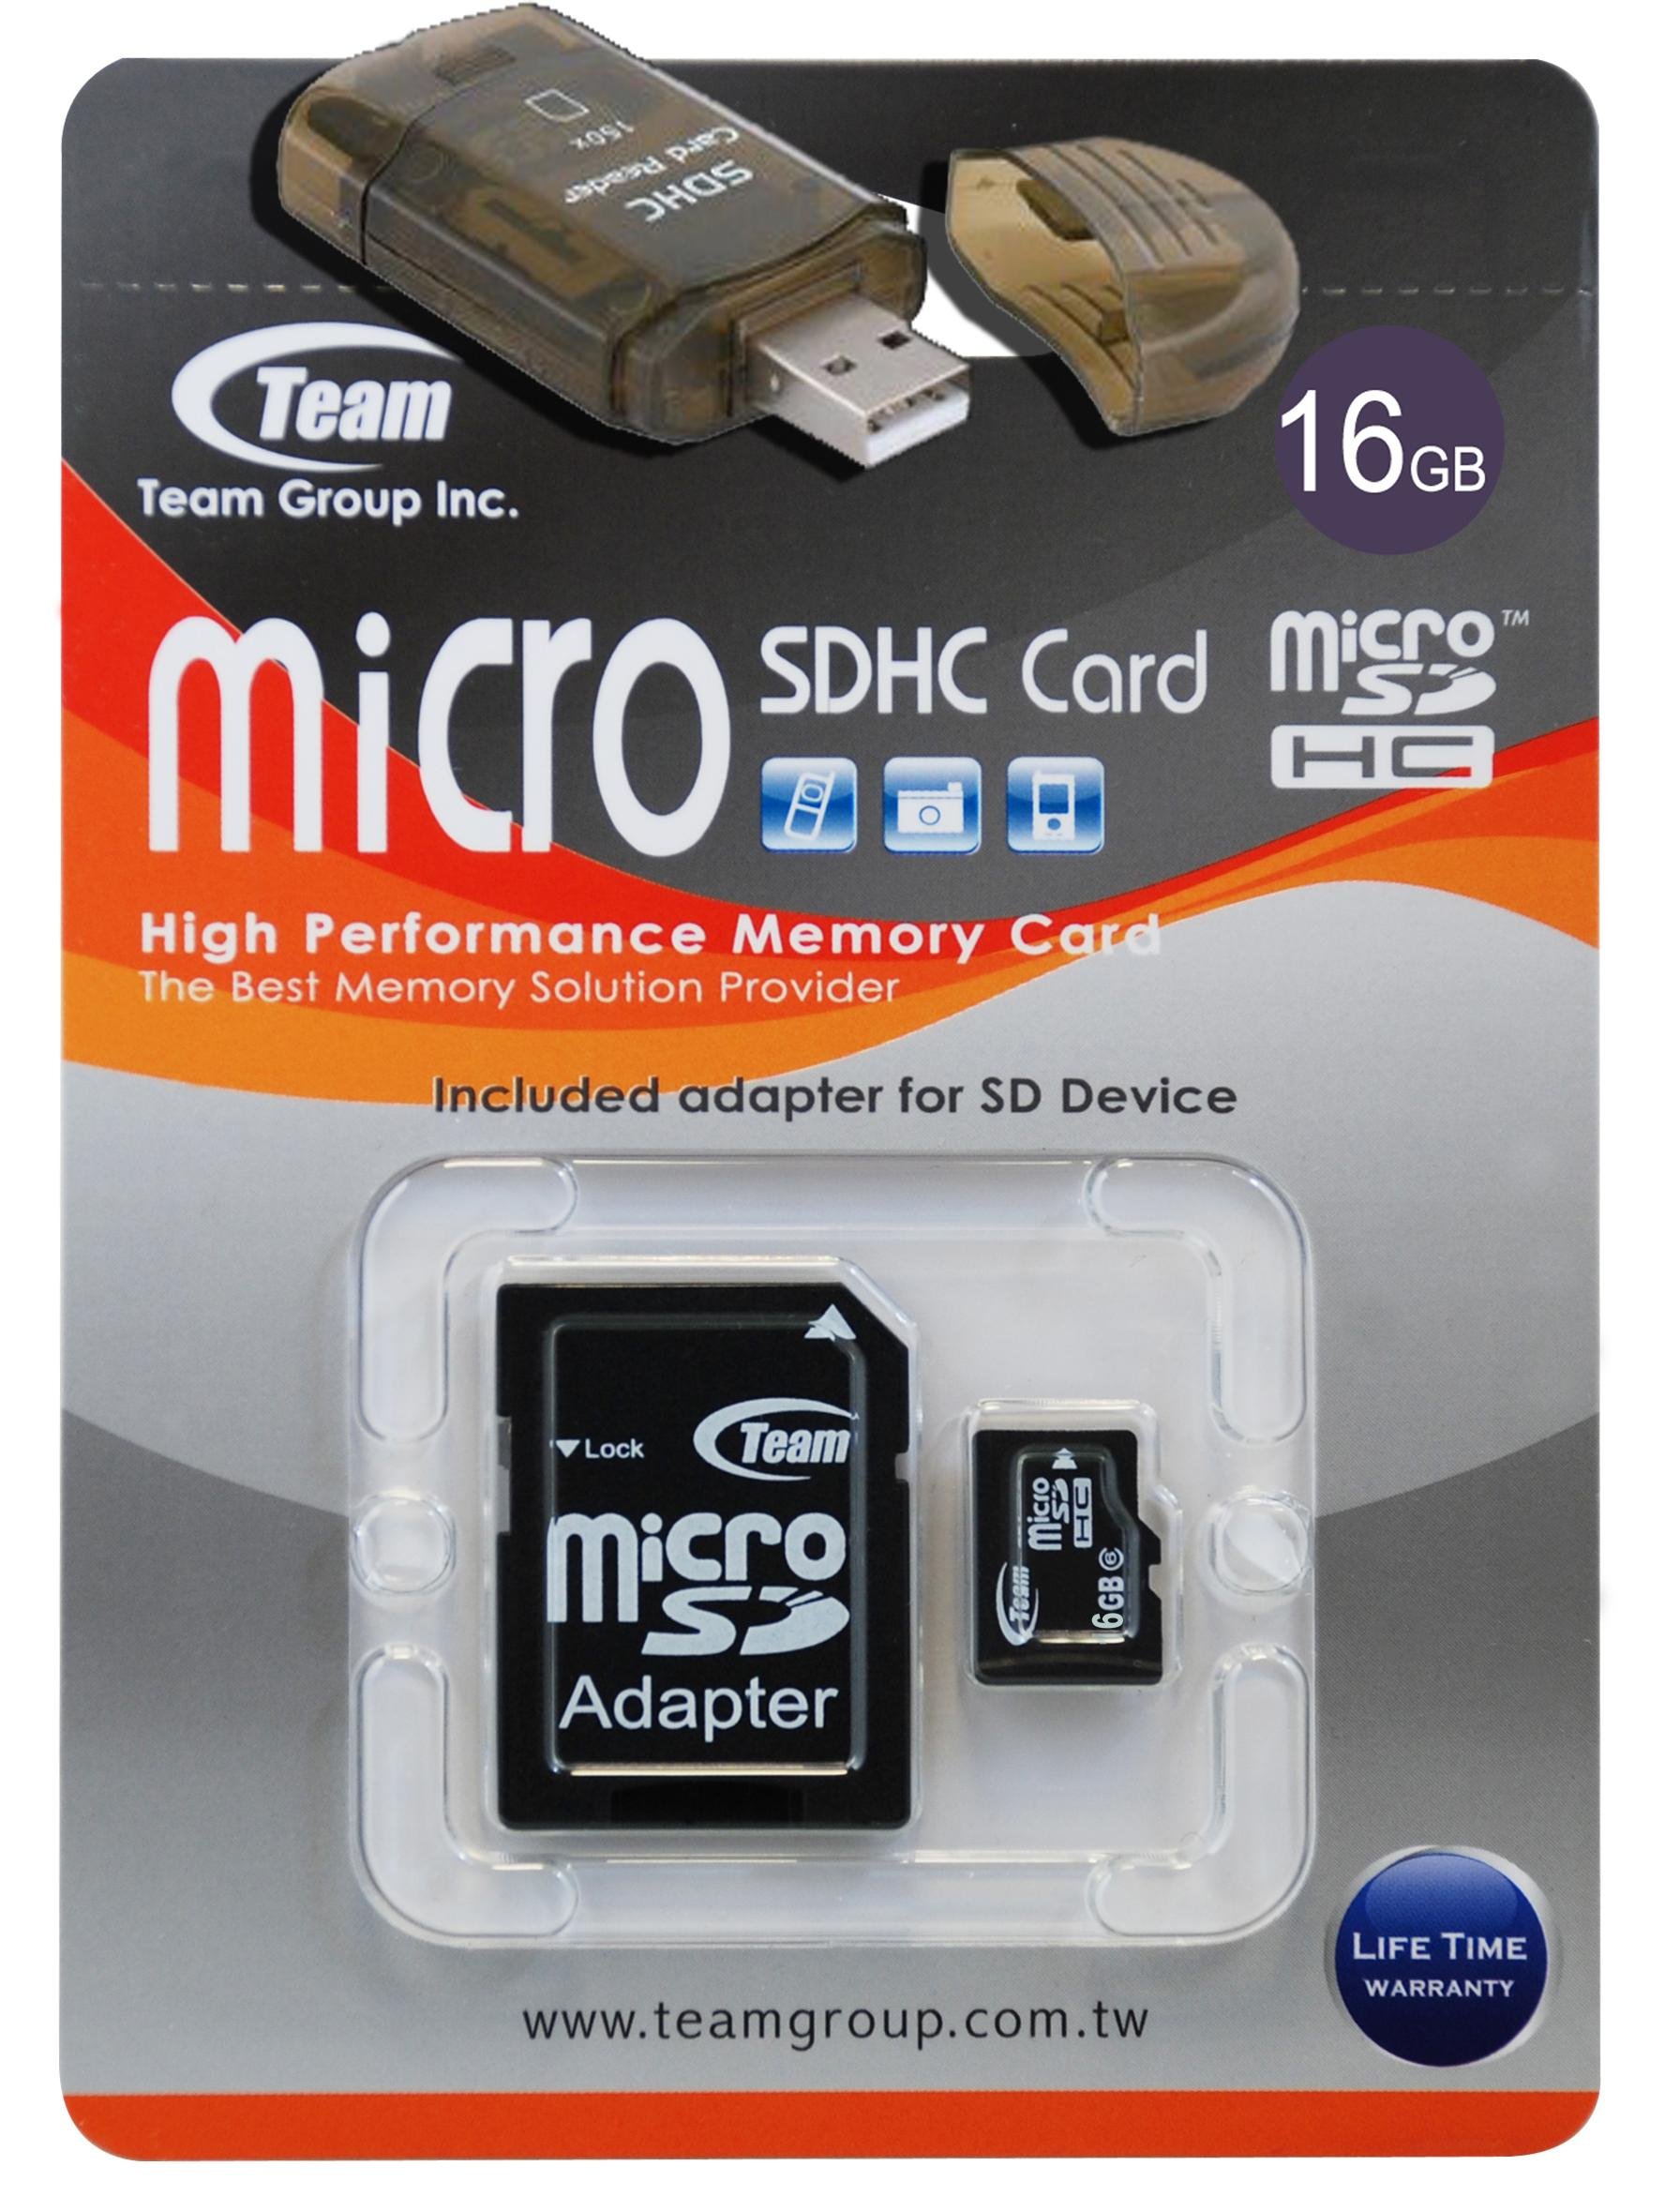 16GB Turbo Speed Class 6 MicroSDHC Memory Card For NOKIA Intrigue Luna N8-00. High Speed Card Comes with a free SD and USB Ad